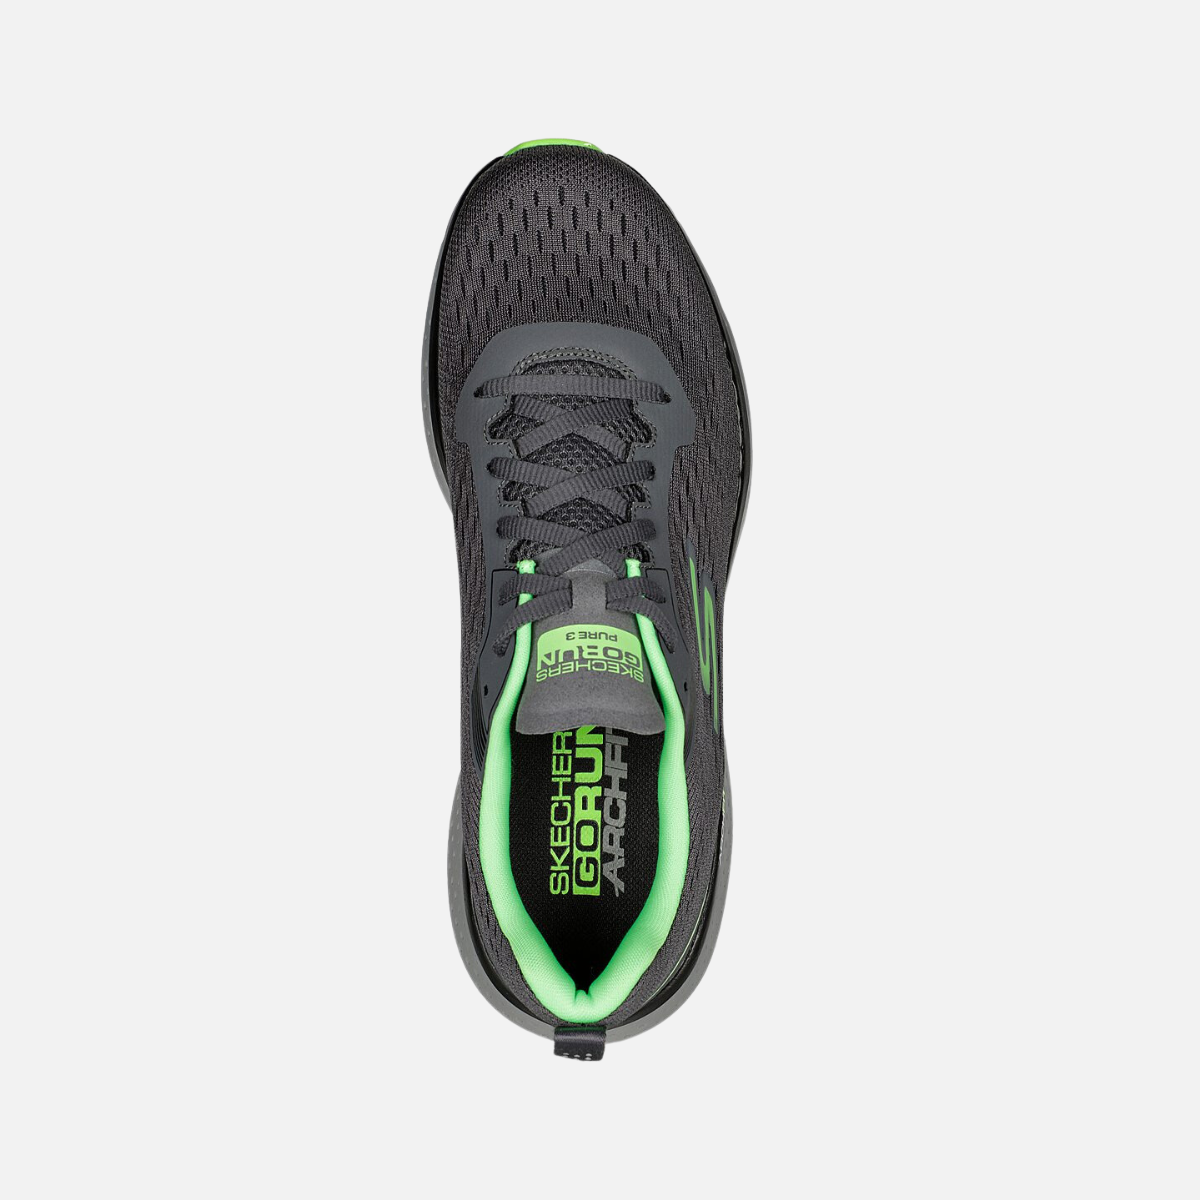 Skechers Go-Run Pure 3 Men's Running Shoes -Charcoal/Lime